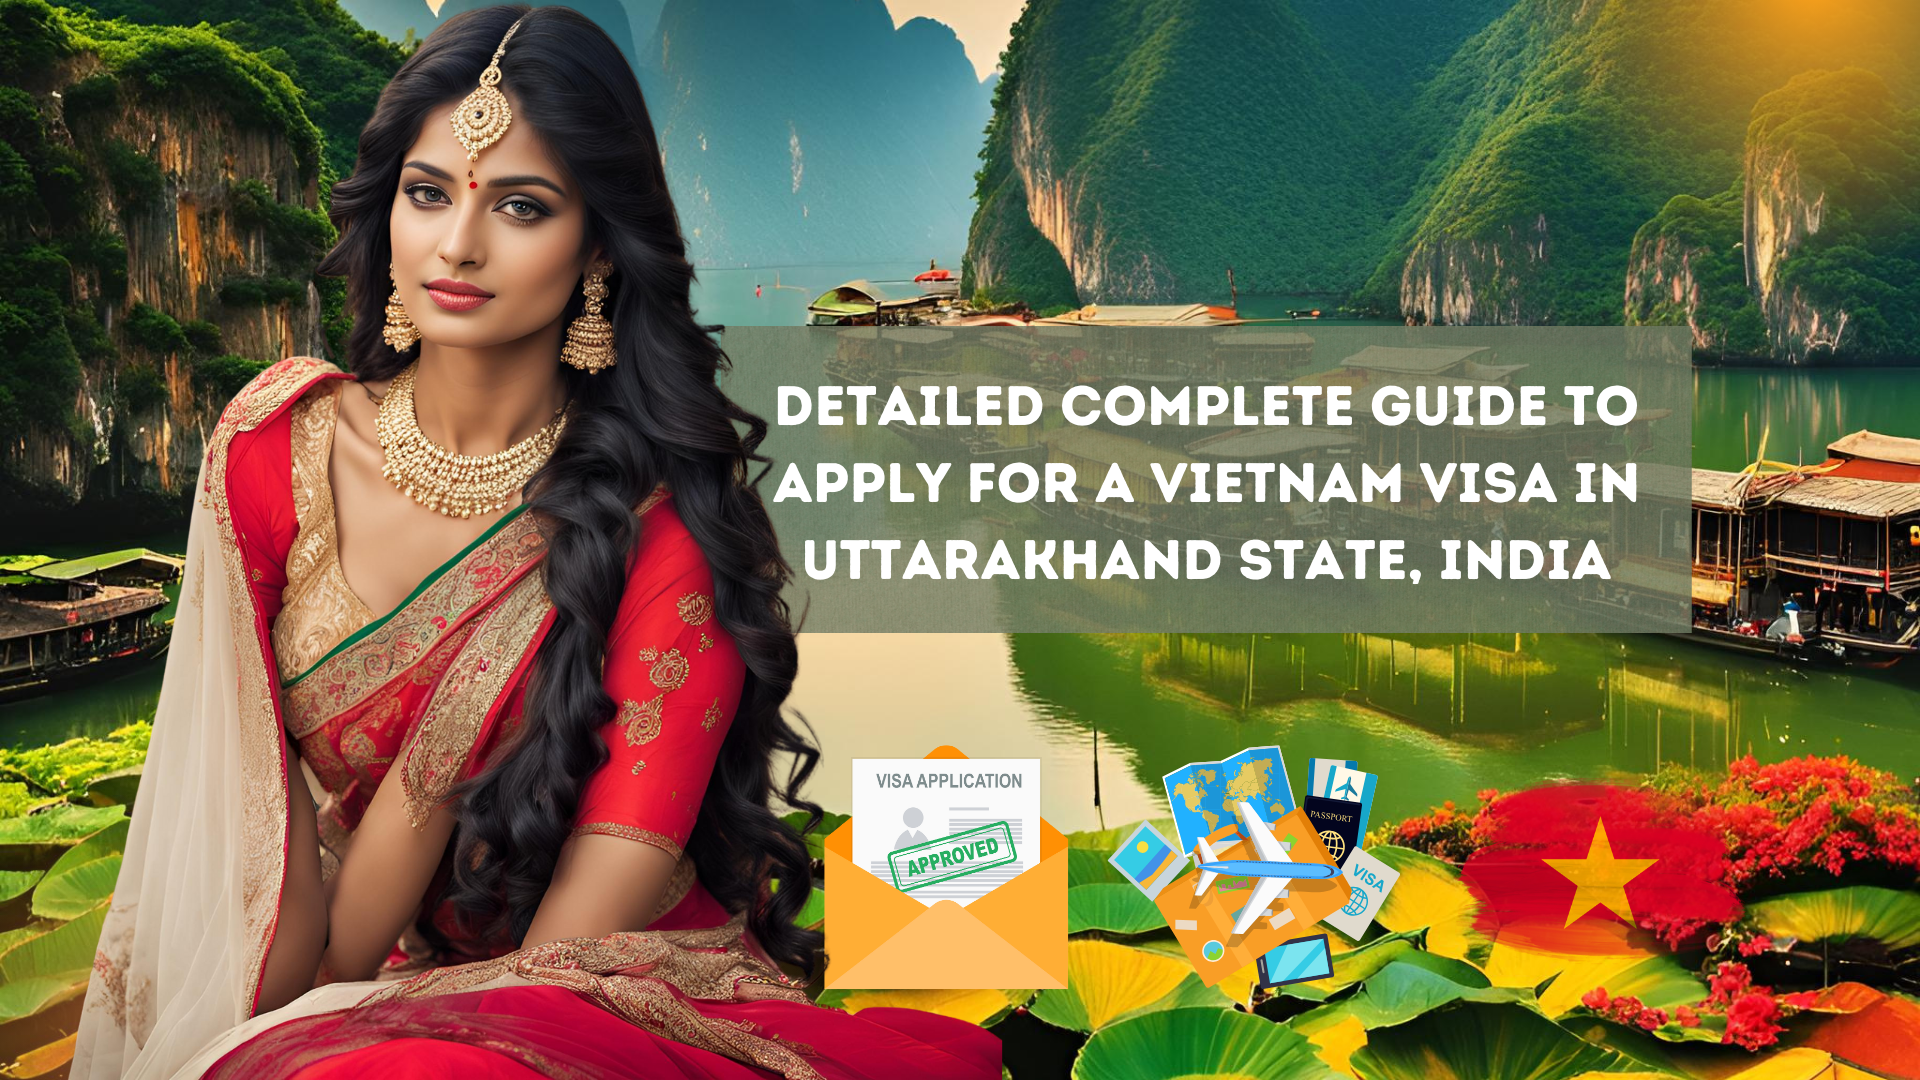 Detailed Complete Guide to Apply for a Vietnam Visa in Uttarakhand State, India